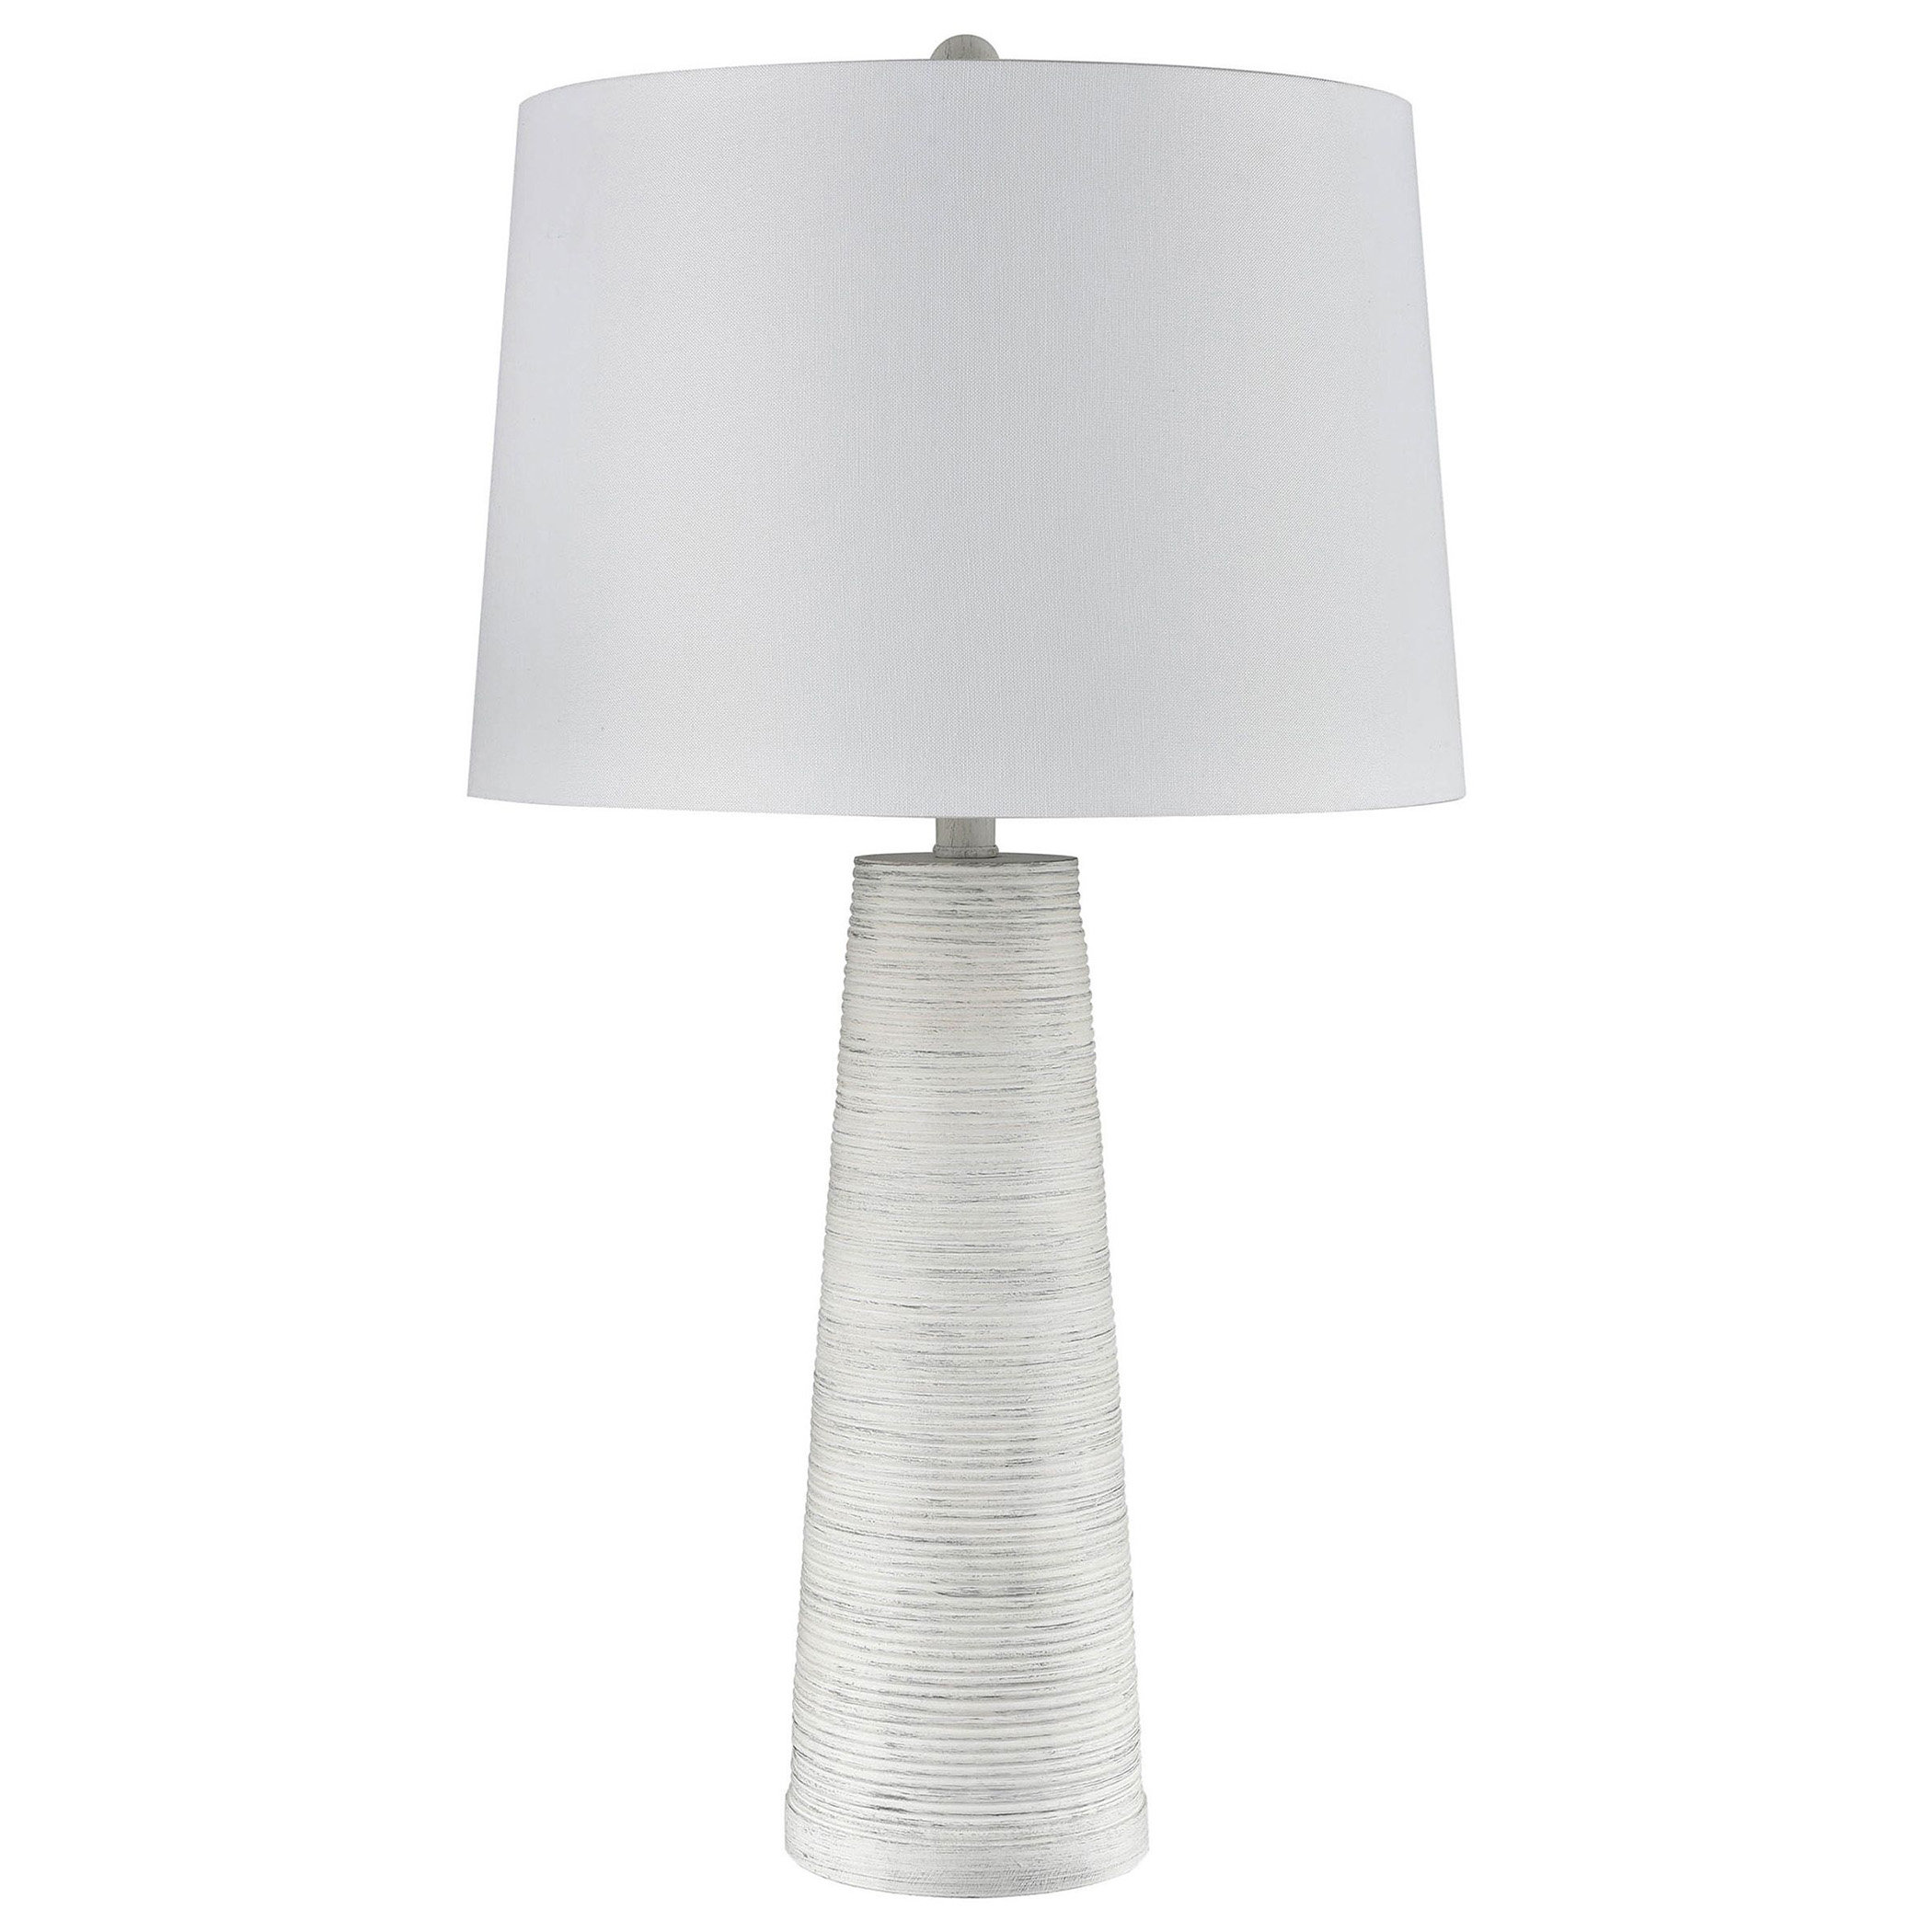 Beachcrest Home Bolte Resin Table Lamp & Reviews